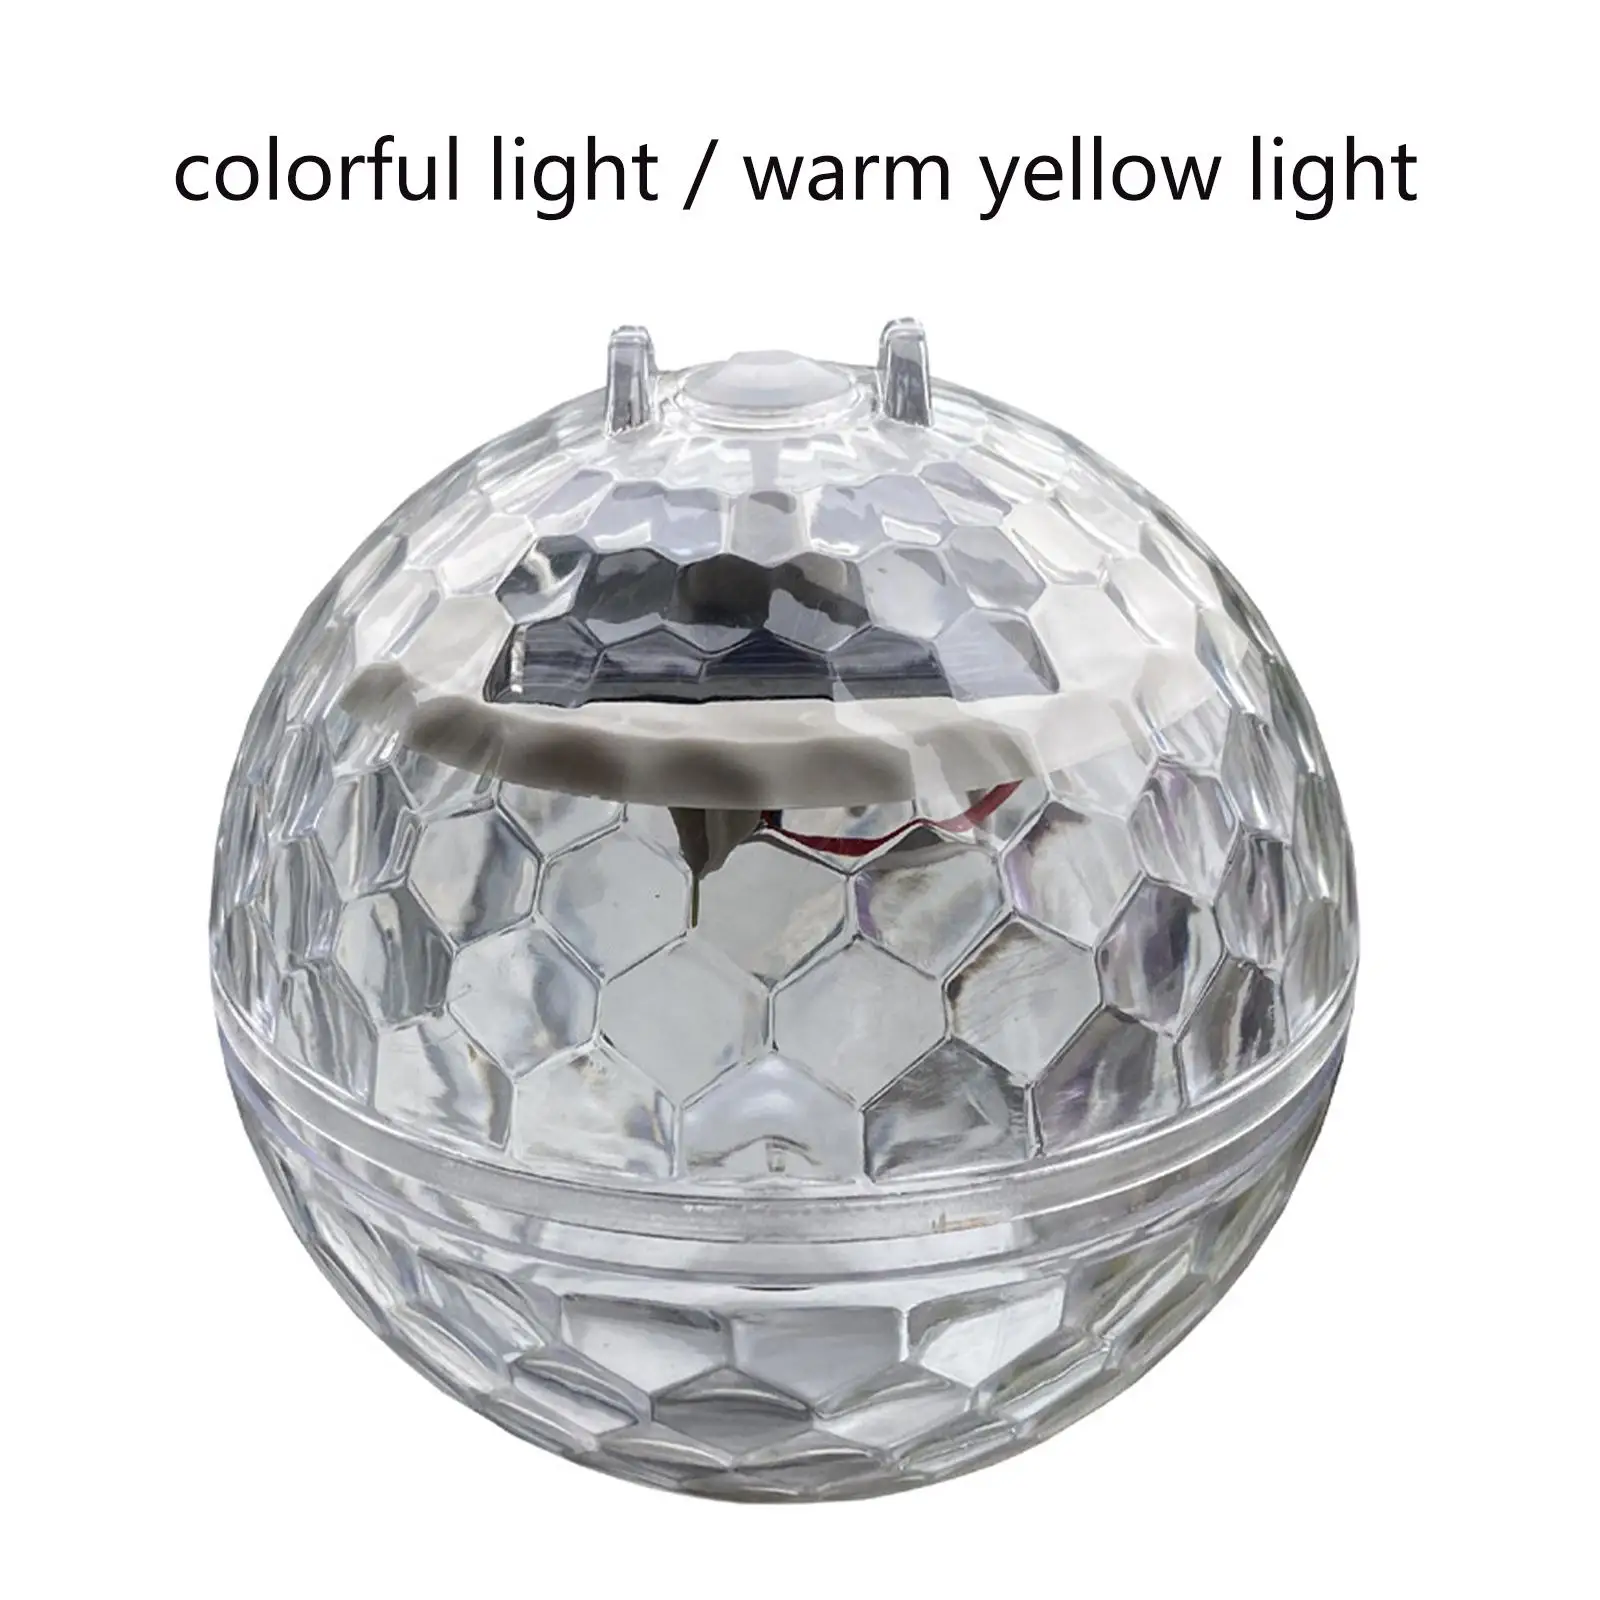 Solar Floing , Accessories,Werproof Solar  Lights for Tub Home Outdoor Backyard Lawn